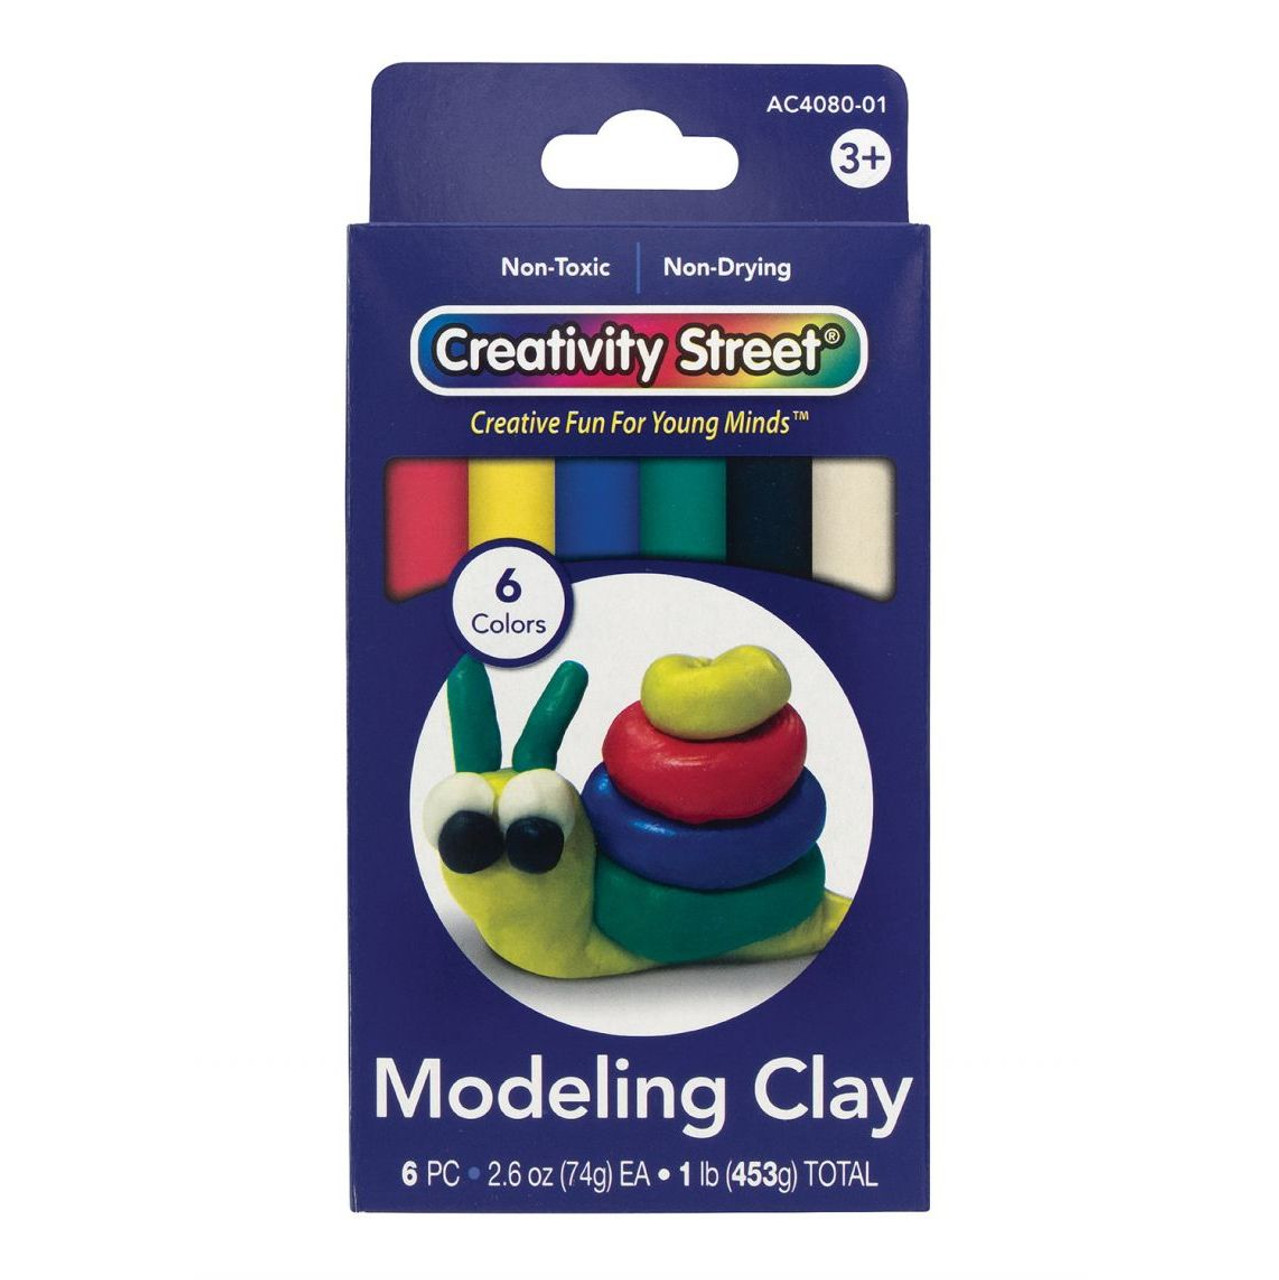 Modeling Clay World Colors